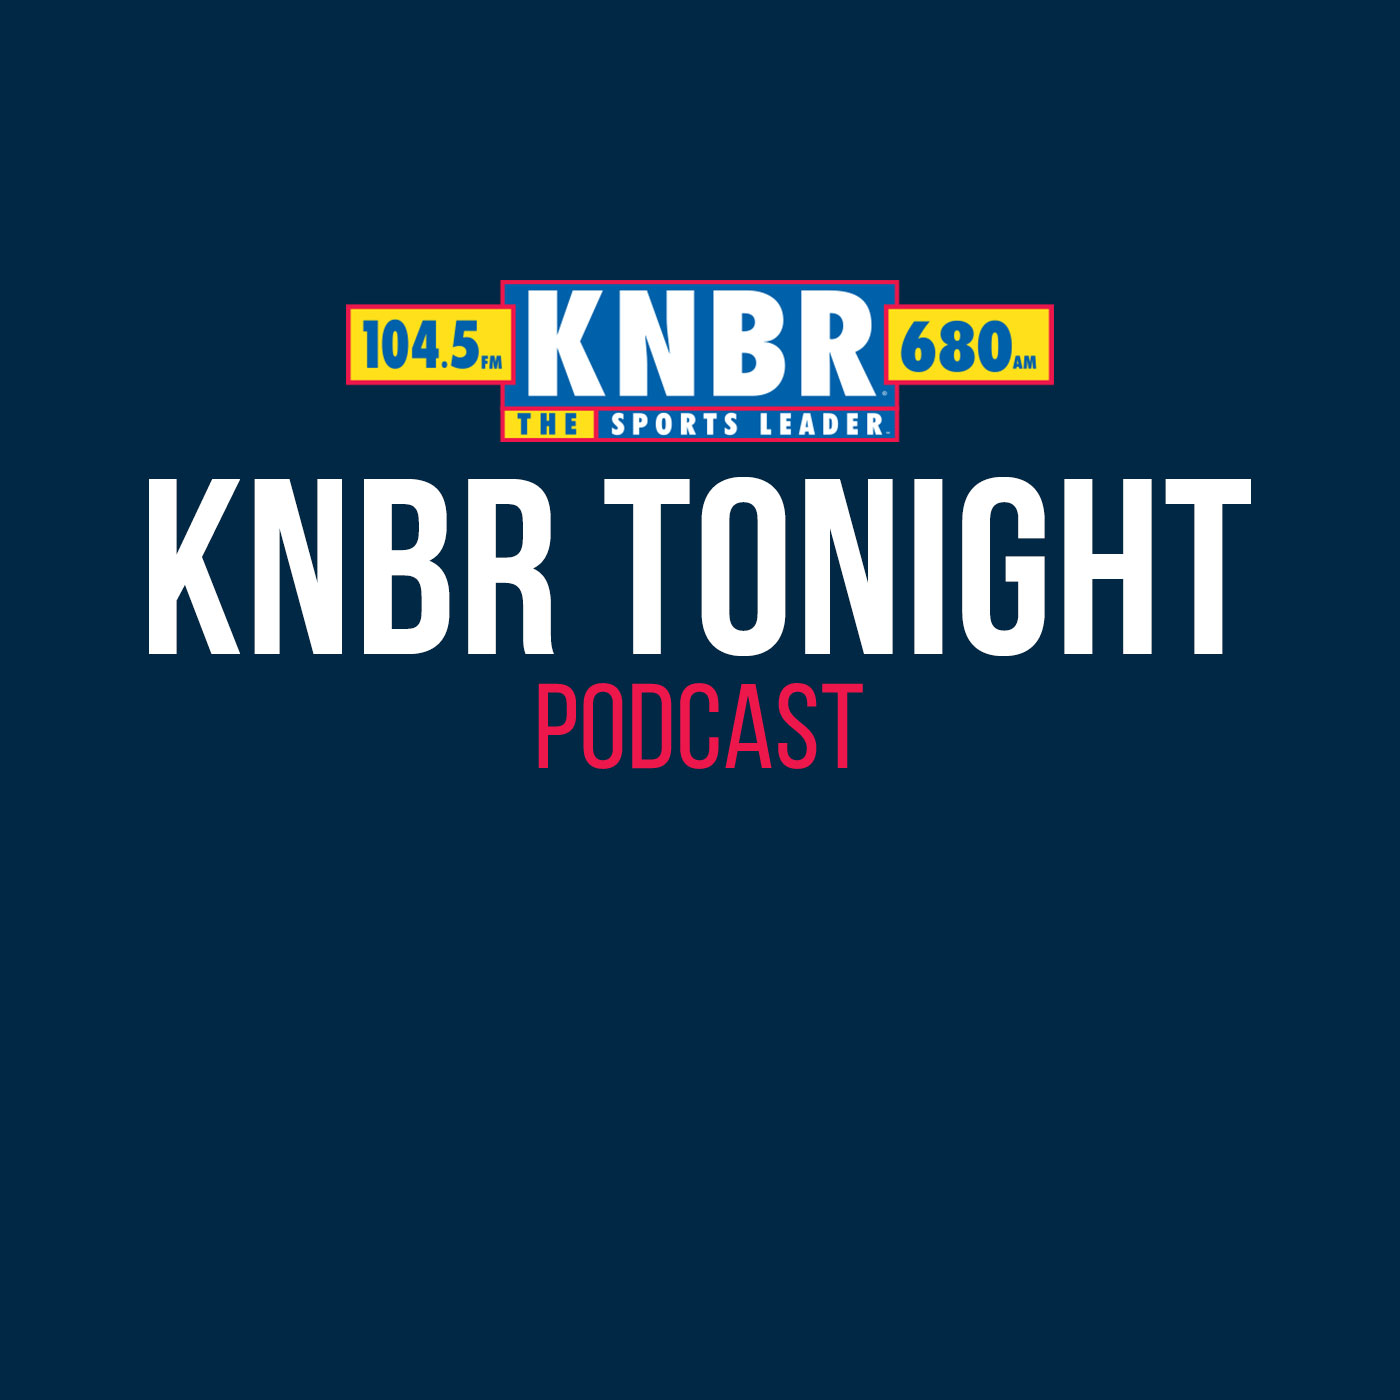 10-19 Matt Barrows joins KNBR Tonight with FP to preview week 7: 49ers vs Chiefs